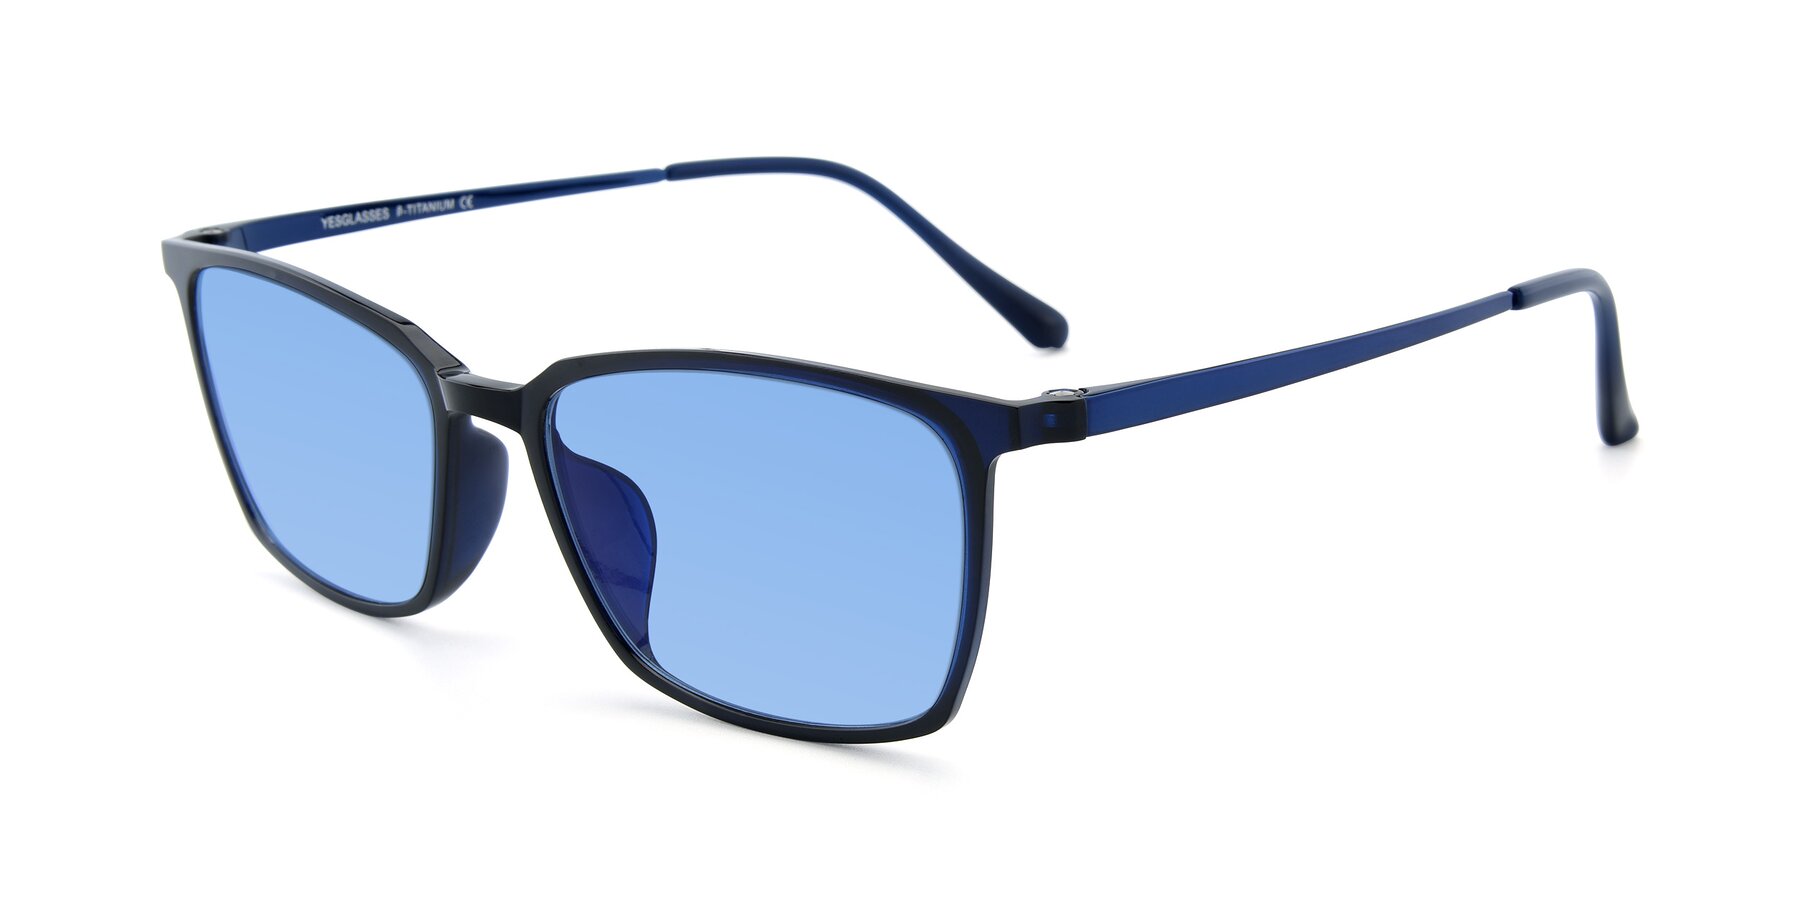 Angle of XC-5009 in Blue with Medium Blue Tinted Lenses